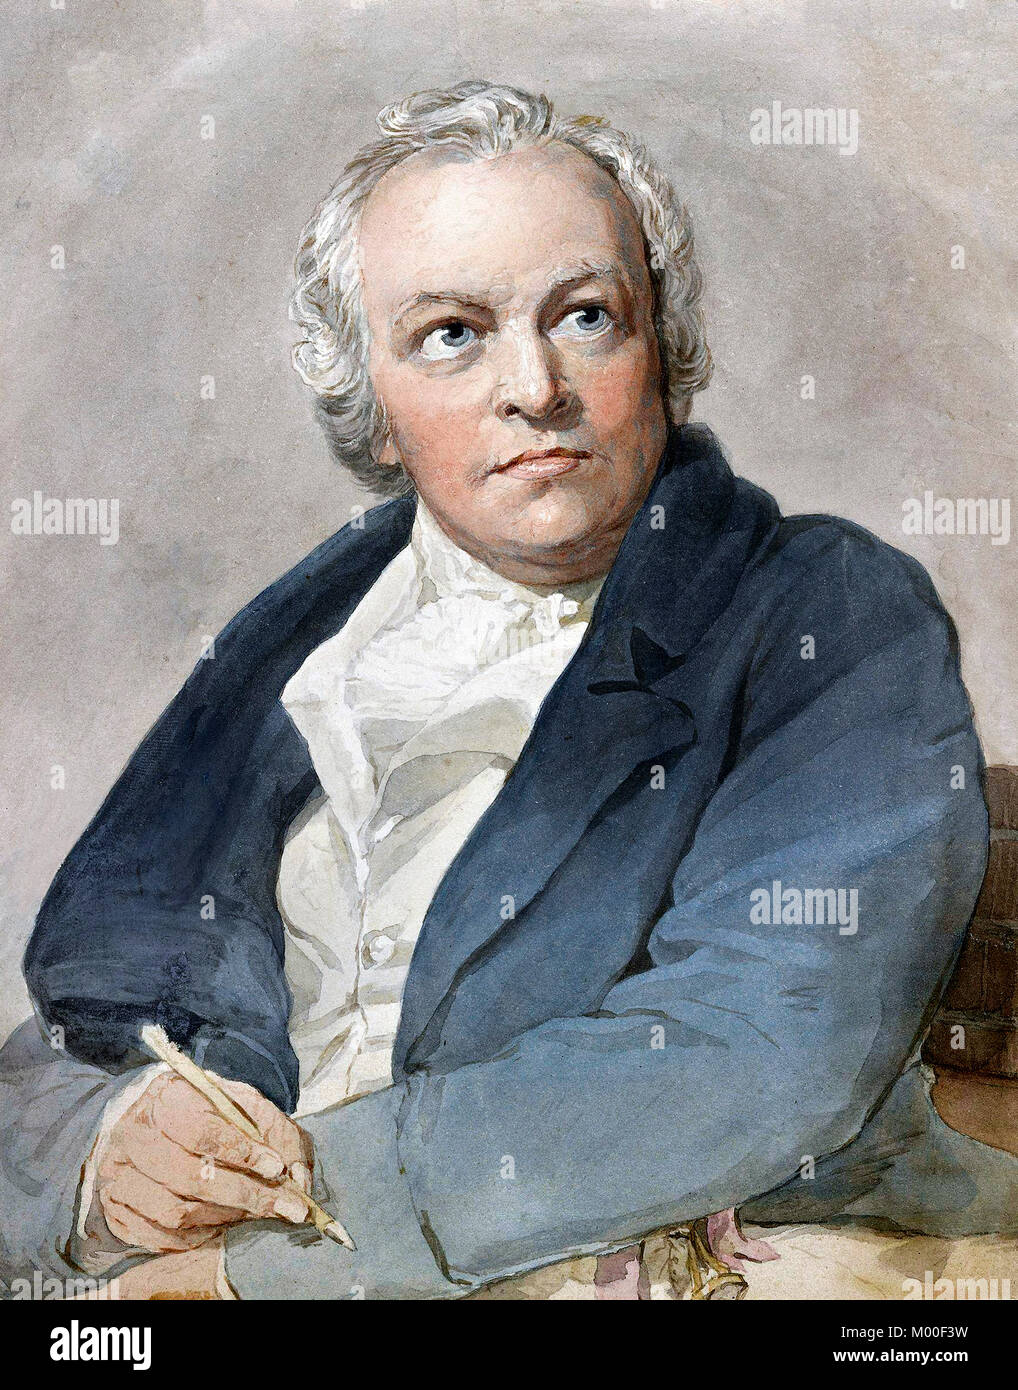 William Blake (1757-1827) the English poet, painter, and printmaker. Copy after Thomas Phillips, watercolour on paper, 1807. Stock Photo